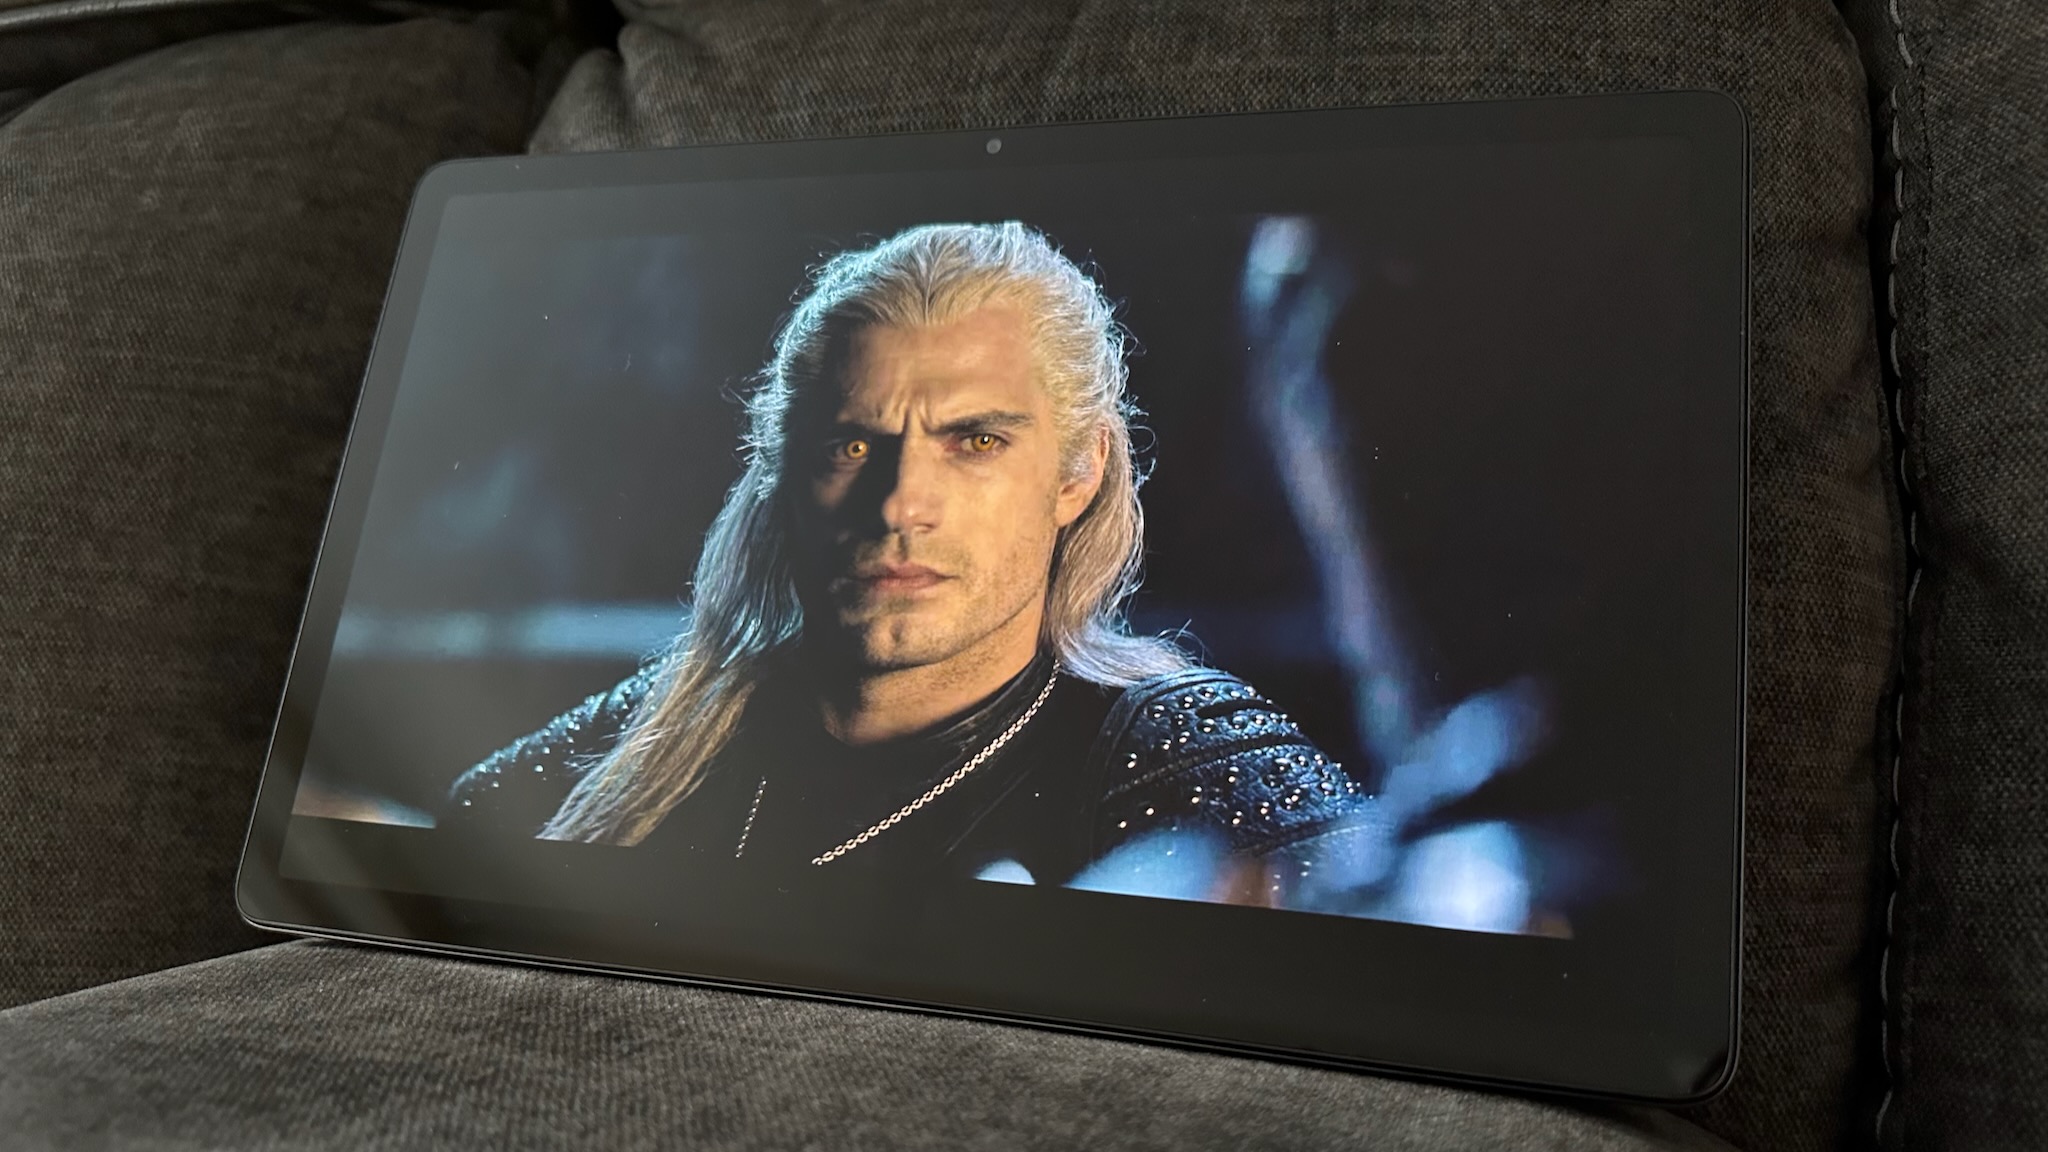 Streaming The Witcher on Netflix on the Lenovo Tab P11 Pro (2nd Gen)